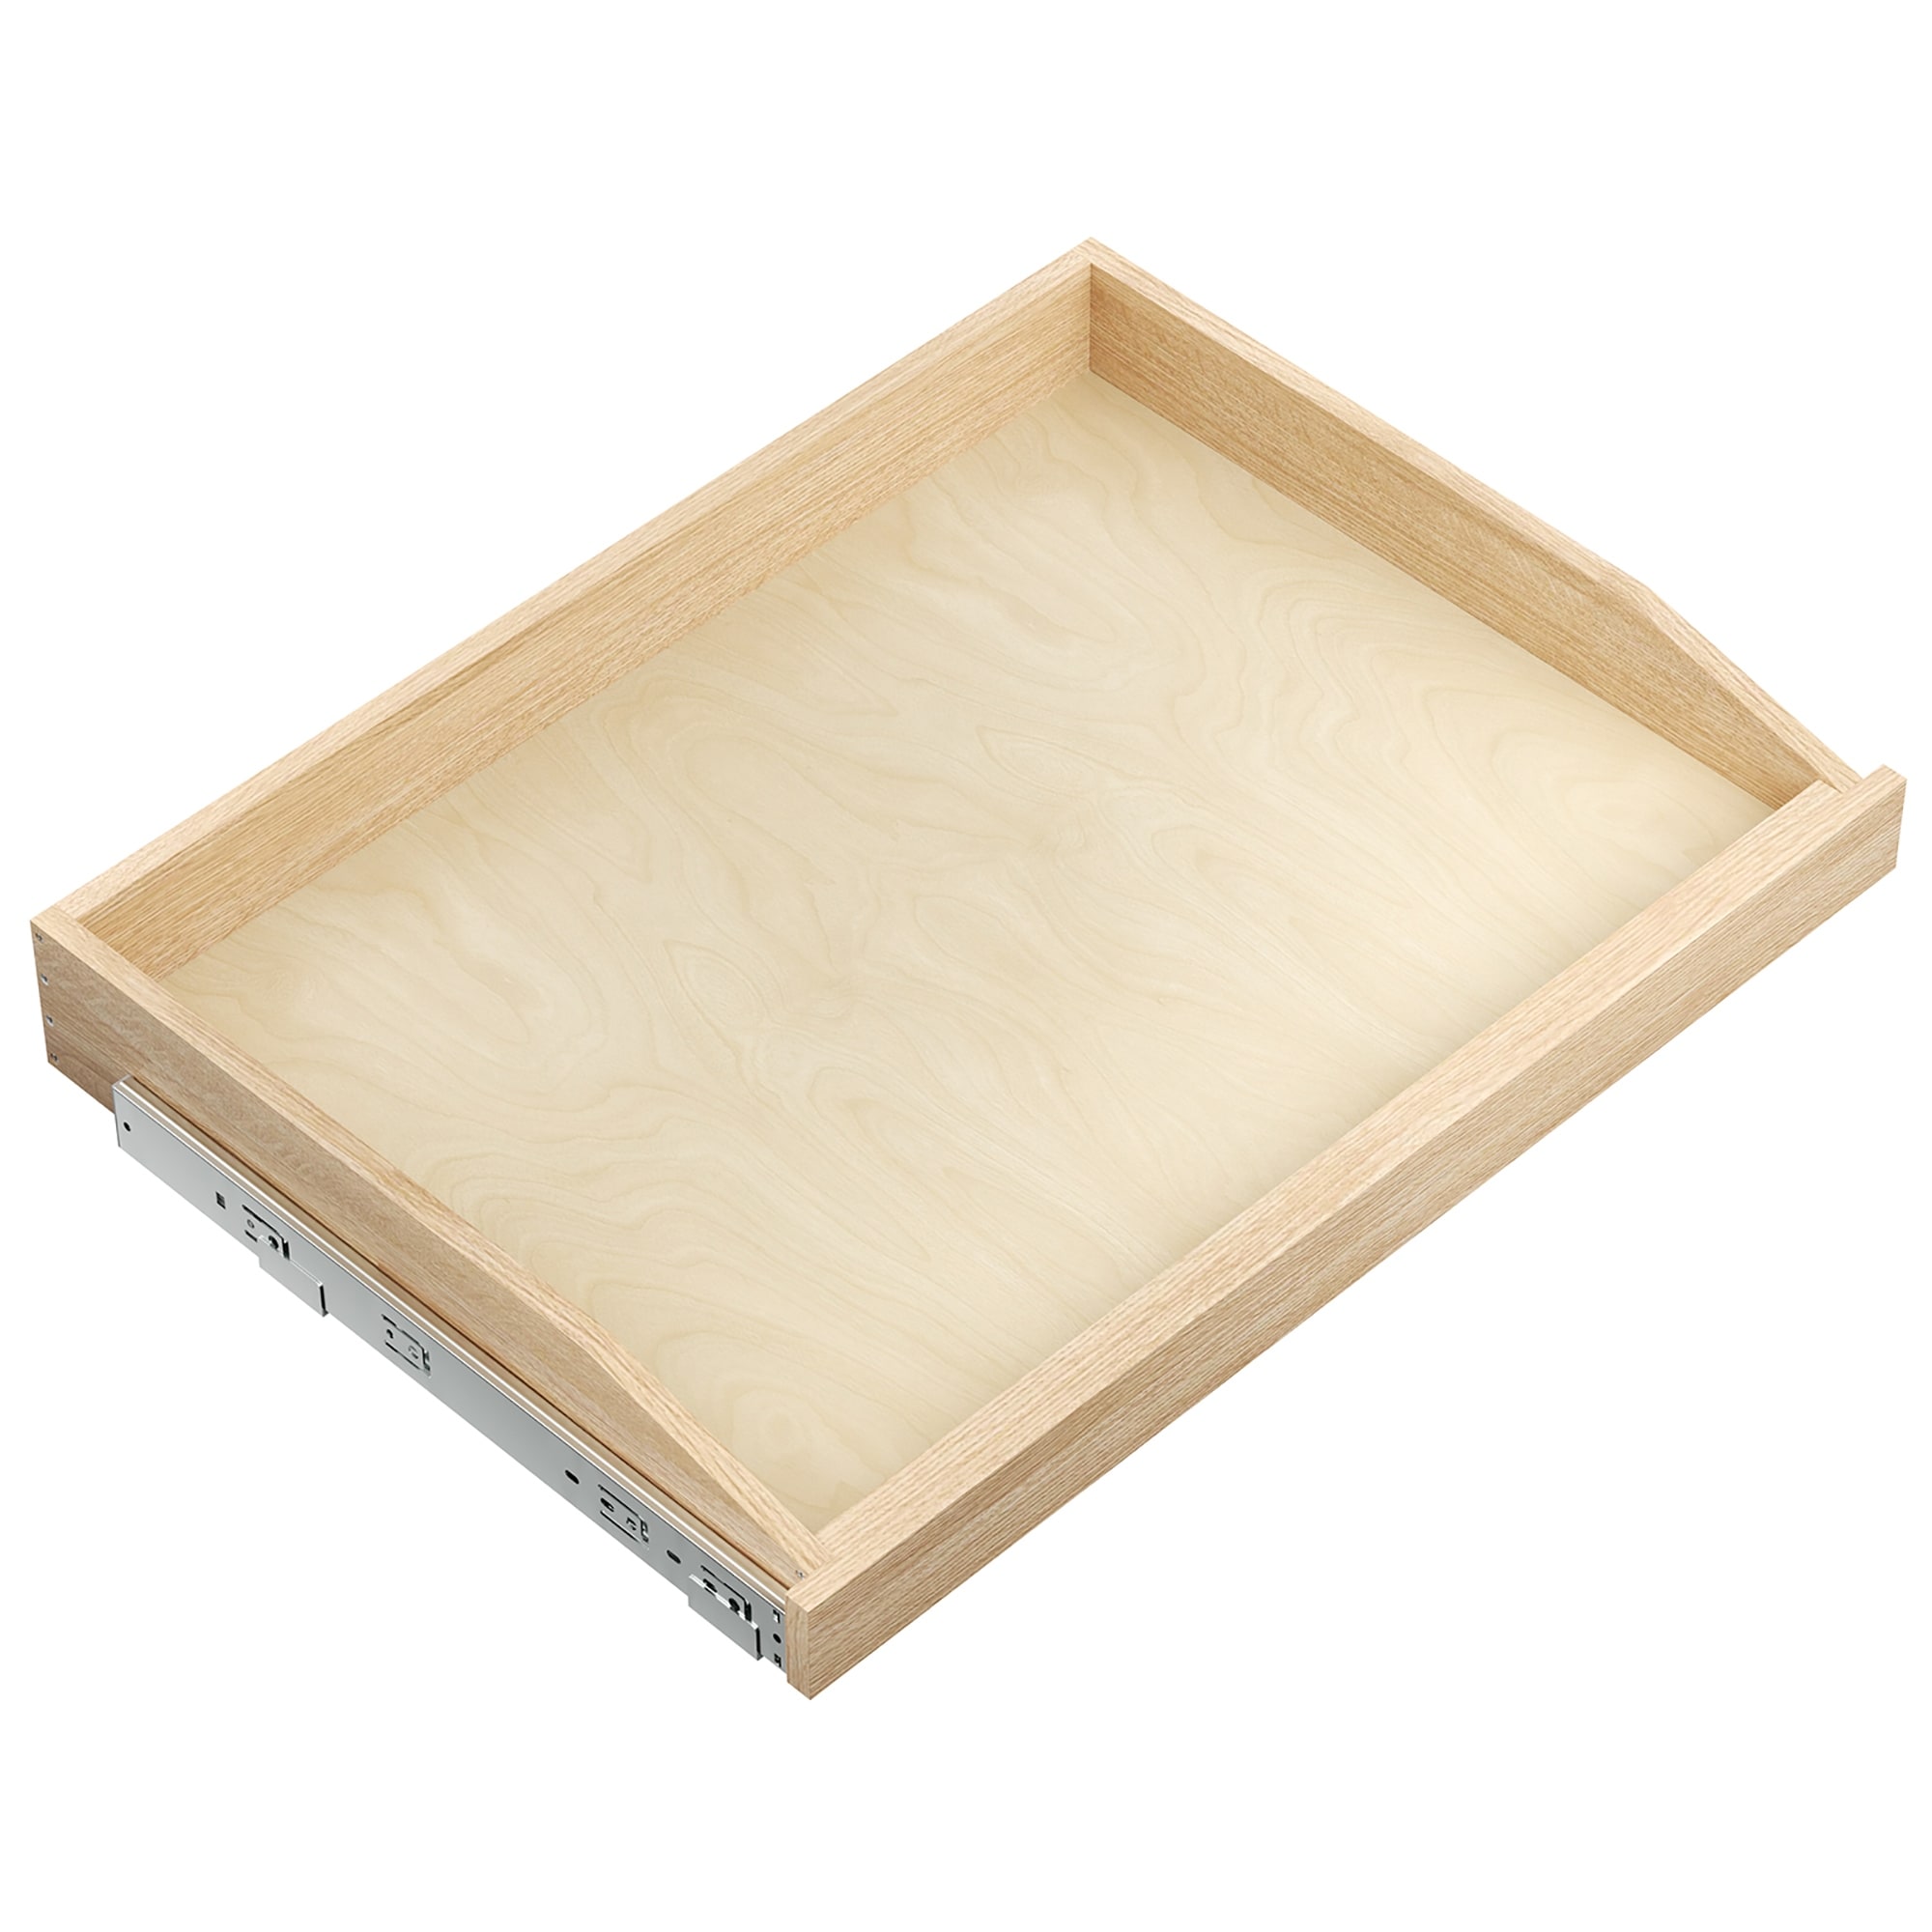 https://ak1.ostkcdn.com/images/products/is/images/direct/c9b343ab419a2d8087b661ee34e05d76f0dea262/HOMLUX-Wood-Slide-Out-Shelf-with-Soft-Close%C2%A0.jpg